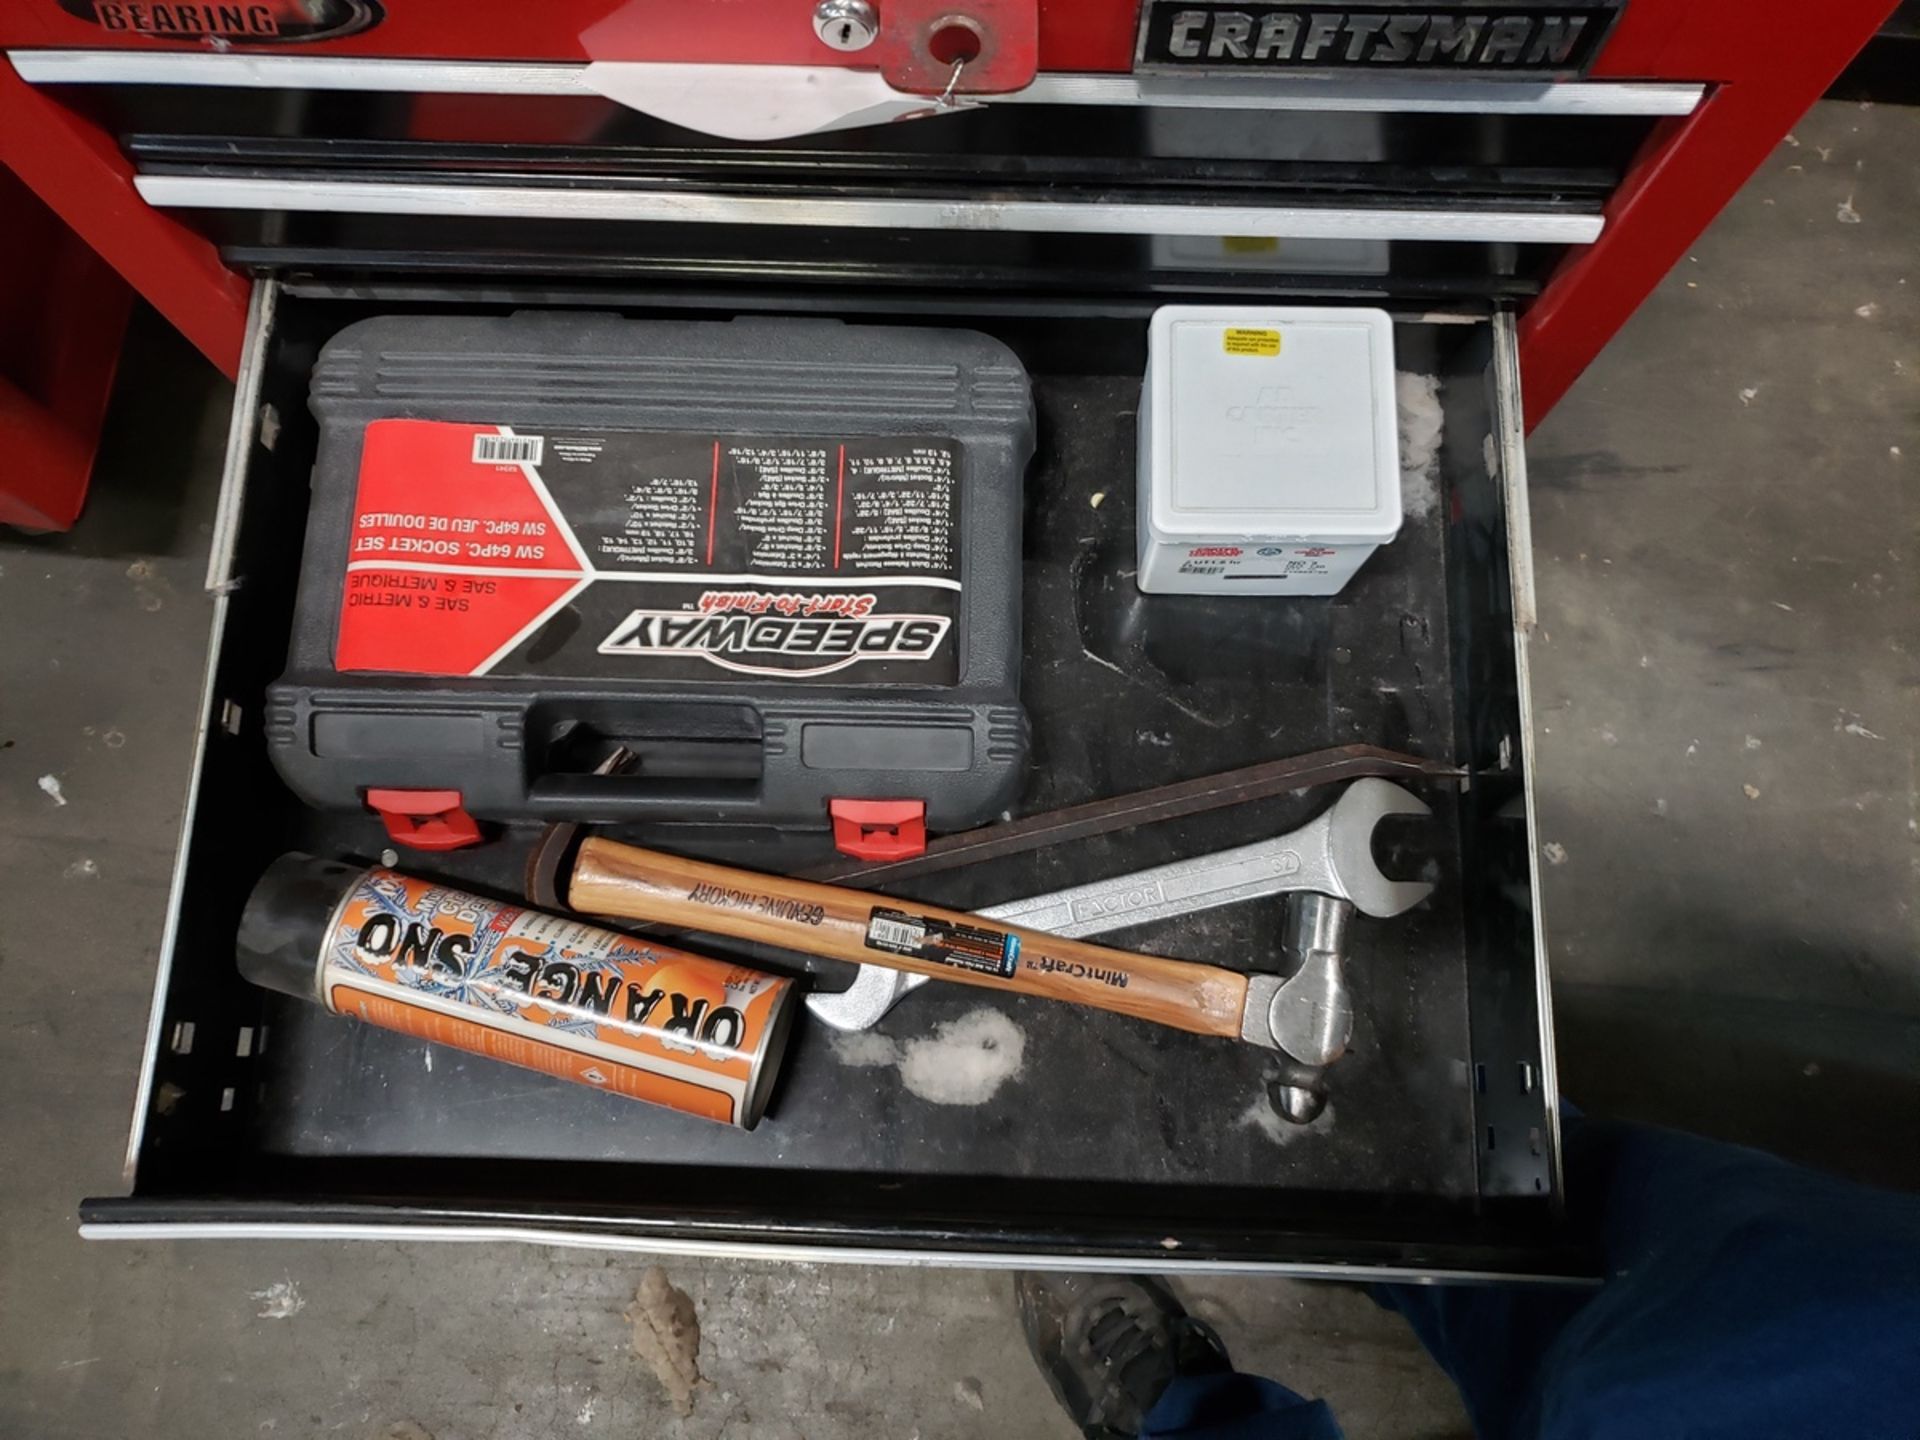 Craftsman Top & Bottom Tool Chests, W/ Contents, (See Additional Pictures) Rig Fee: $25 - Image 5 of 7